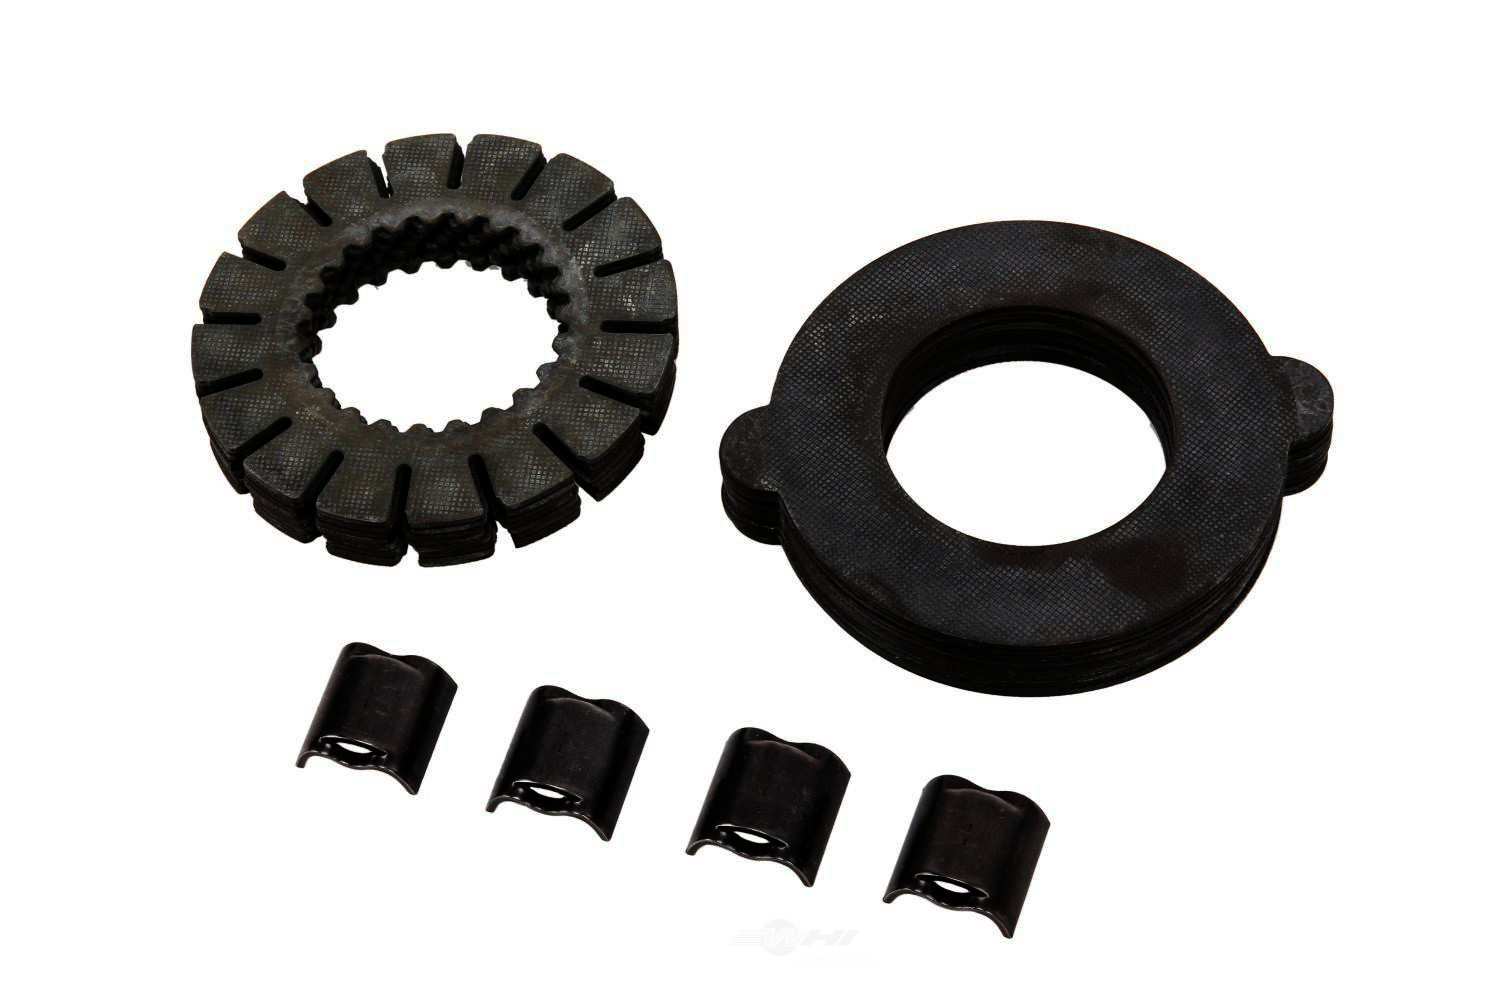 GM GENUINE PARTS - Differential Clutch Pack - GMP 12524505